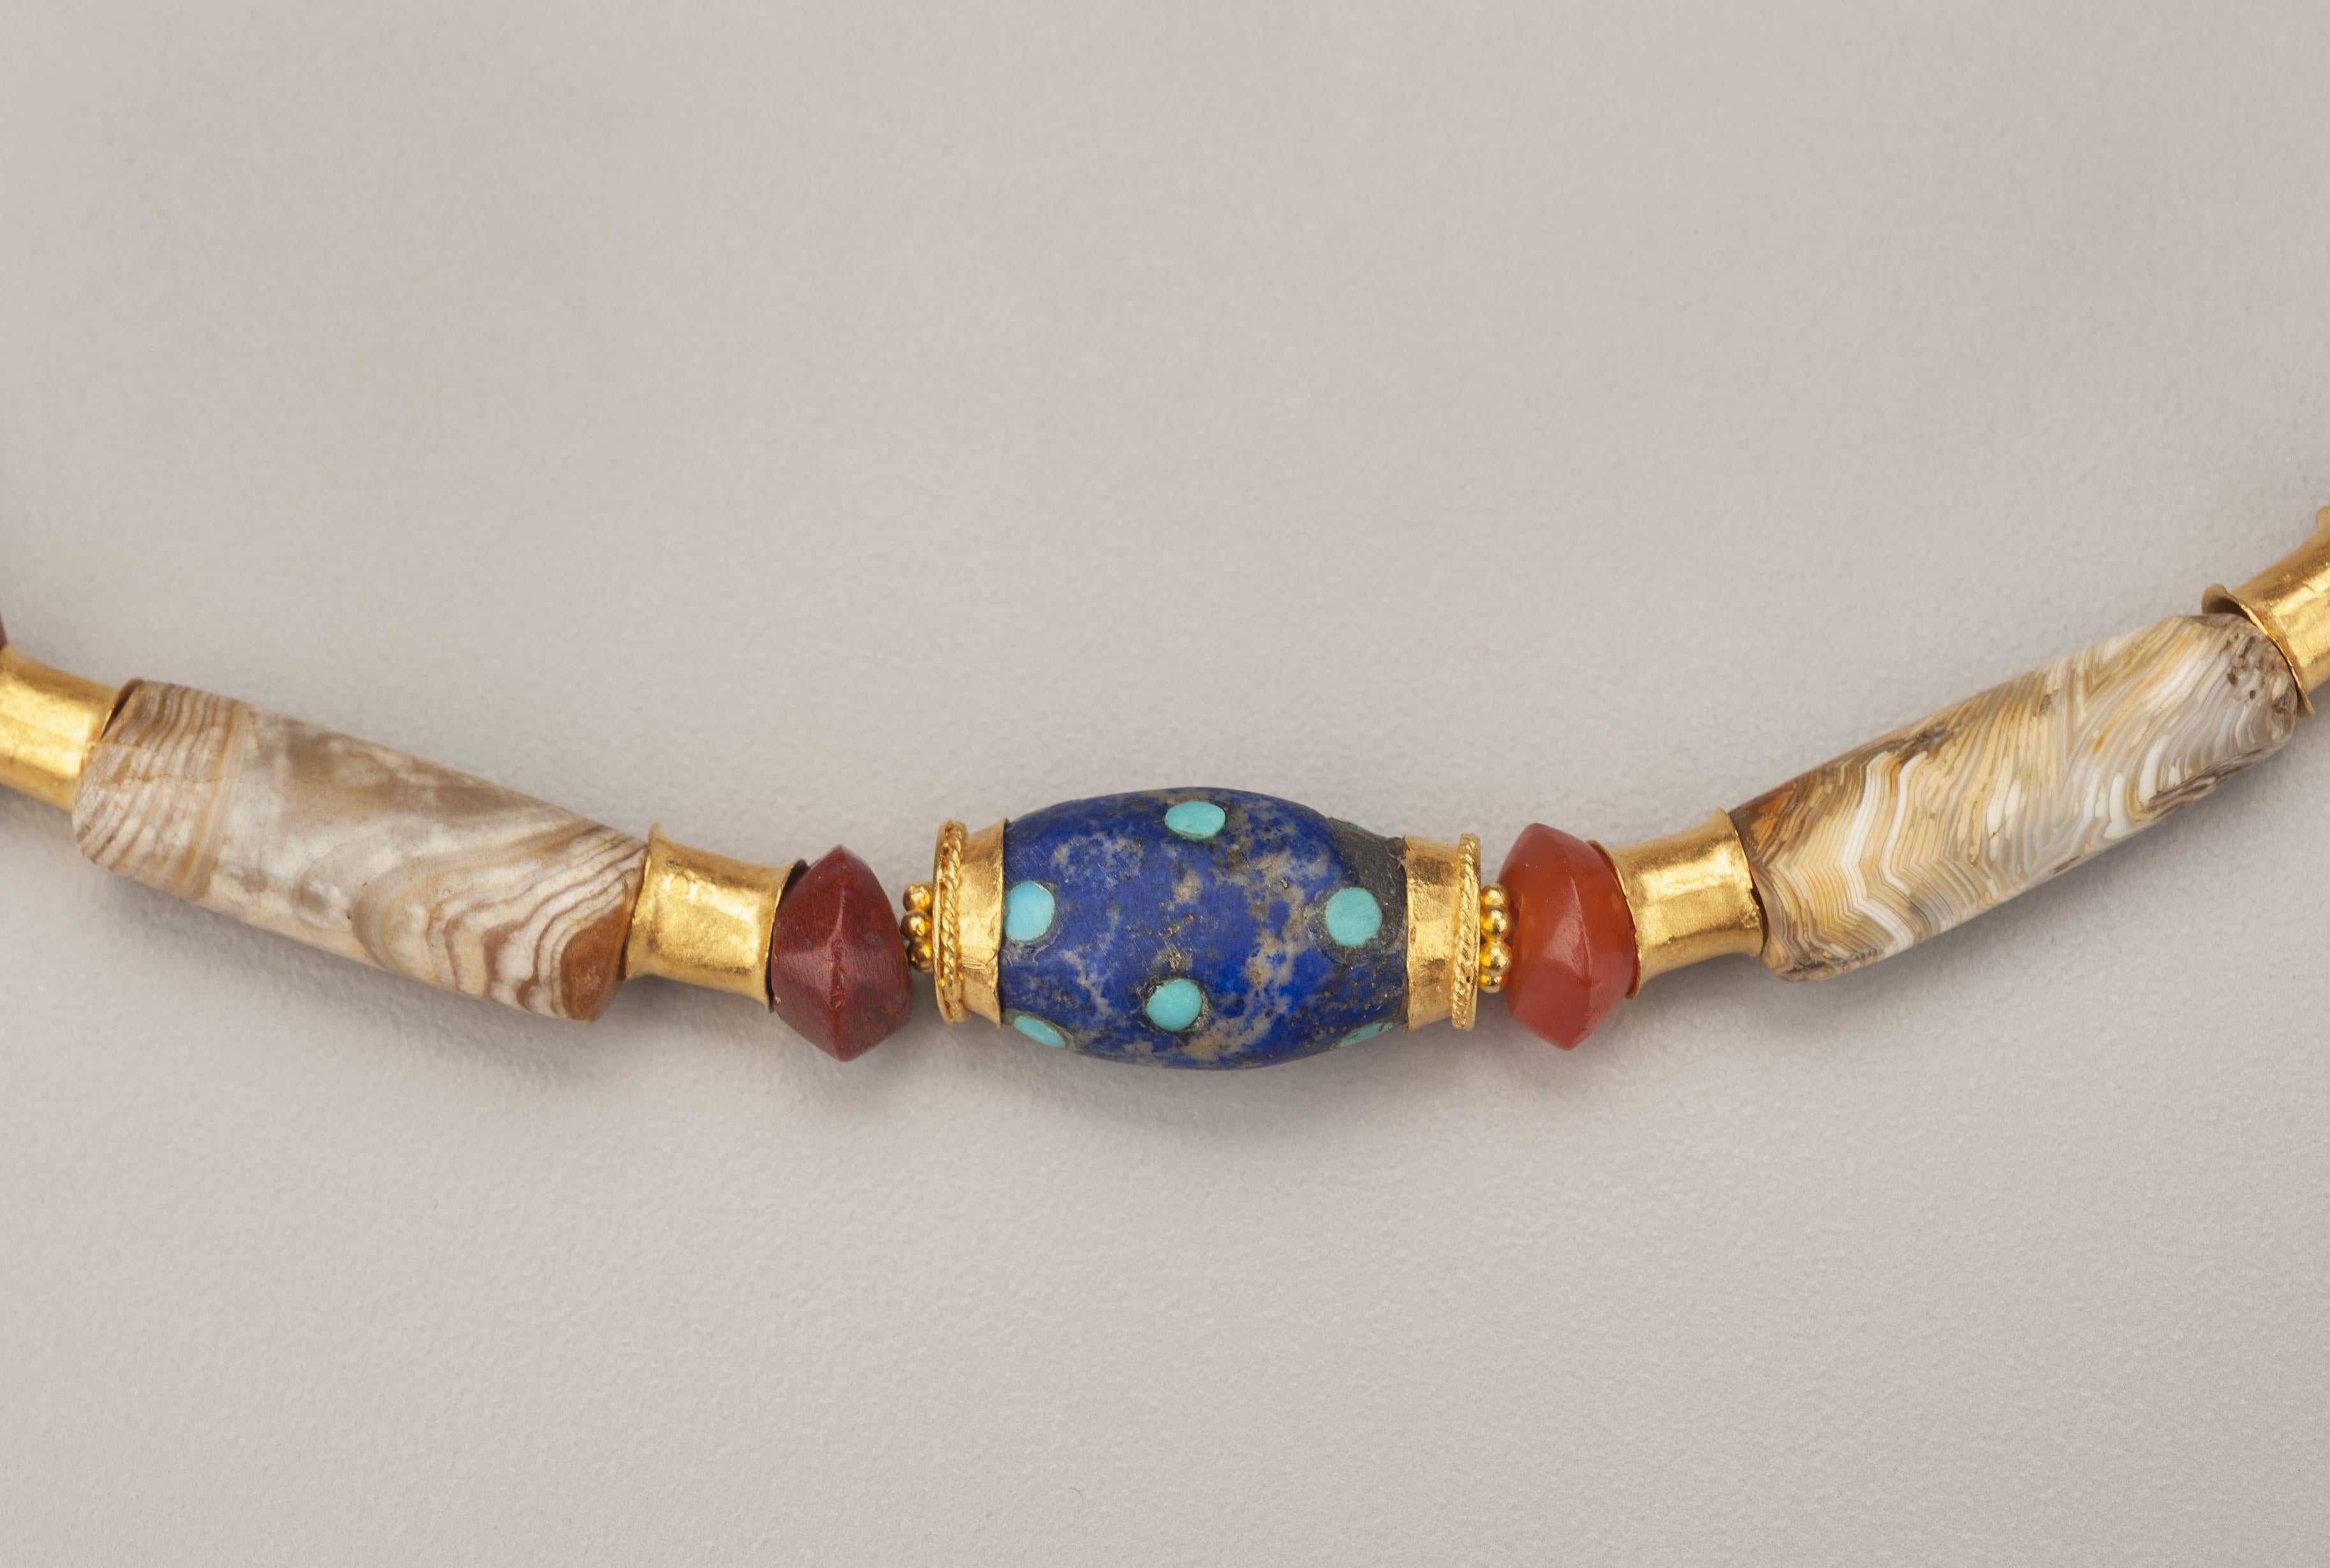 Eight ancient agate barrel beads faced with sixteen flared 20k gold tubes and alternating with eight lapis lazuli short bicone beads faced with pairs of two layer gold granulated ring beads; eighteen carnelian bicones and short barrel beads separate